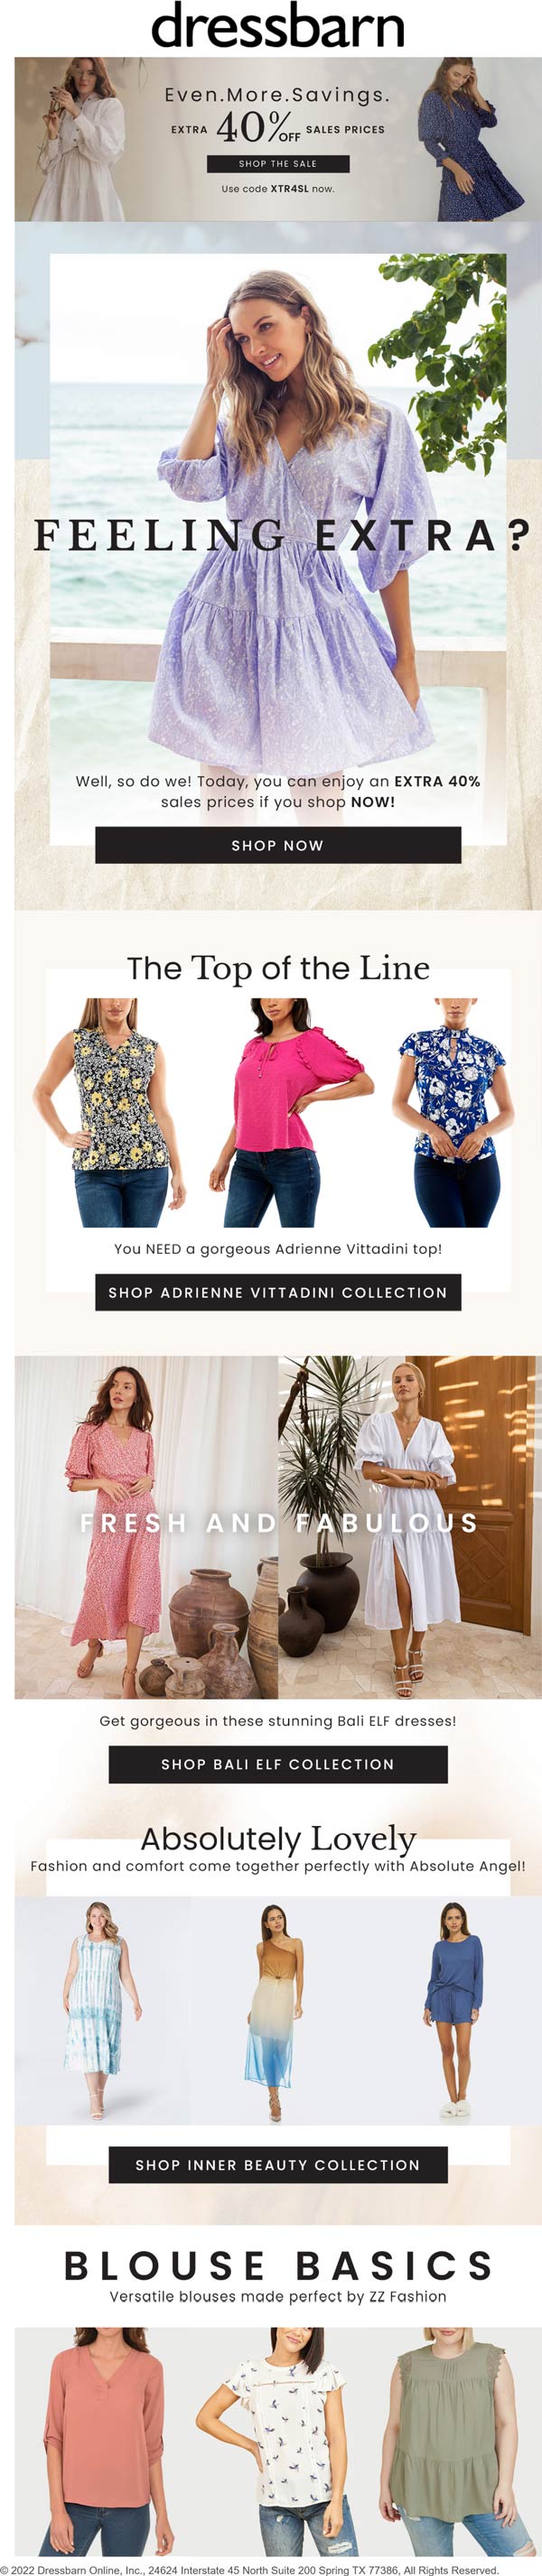 Dressbarn stores Coupon  Extra 40% off sale prices at Dressbarn via promo code EXTRA4SL #dressbarn 